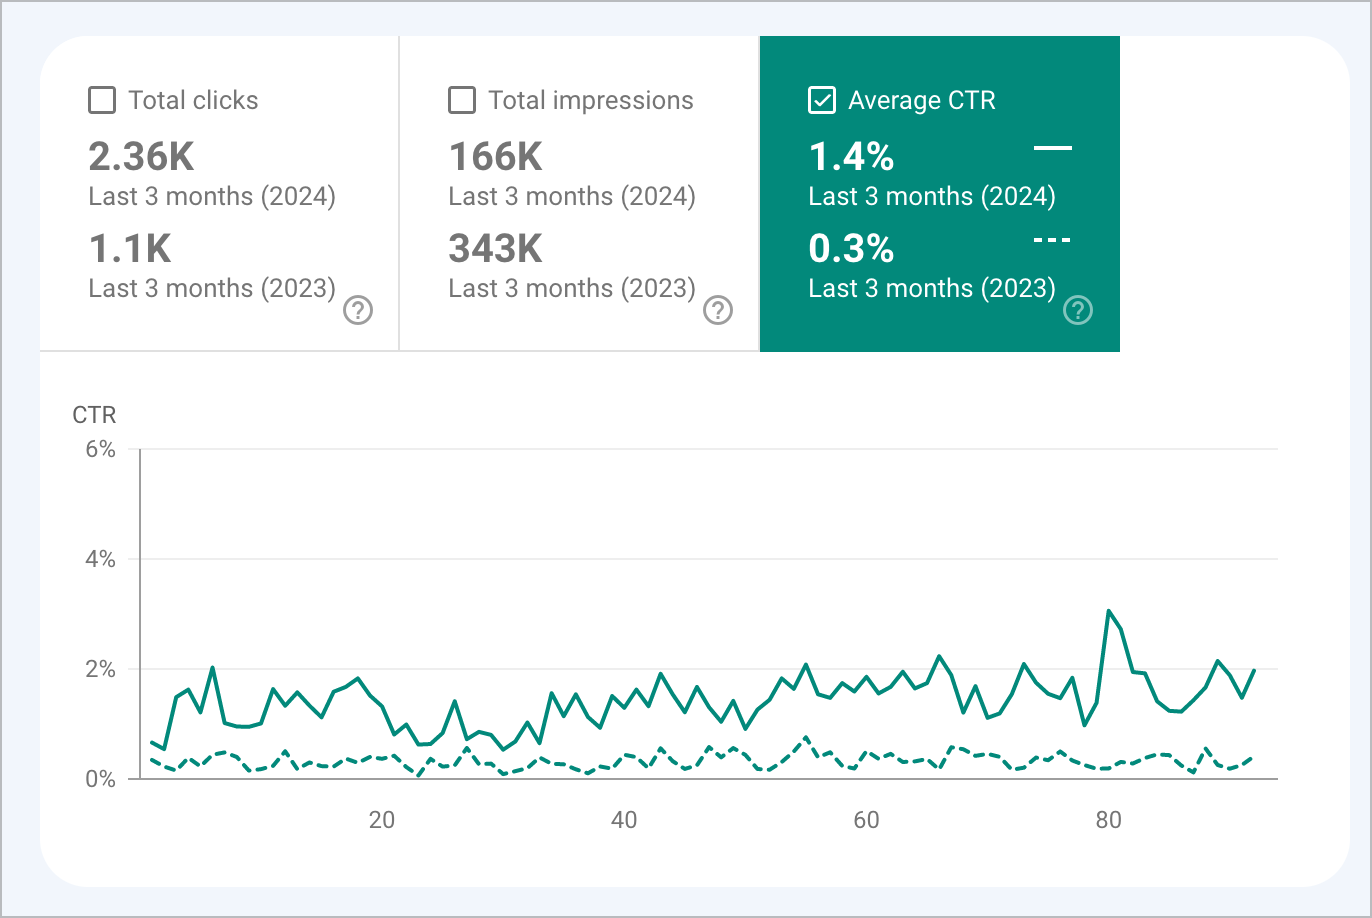 Search Console average click-through-rate example comparing the last three months (at 1.4% average CTR) to the previous year (at 0.3% average CTR)